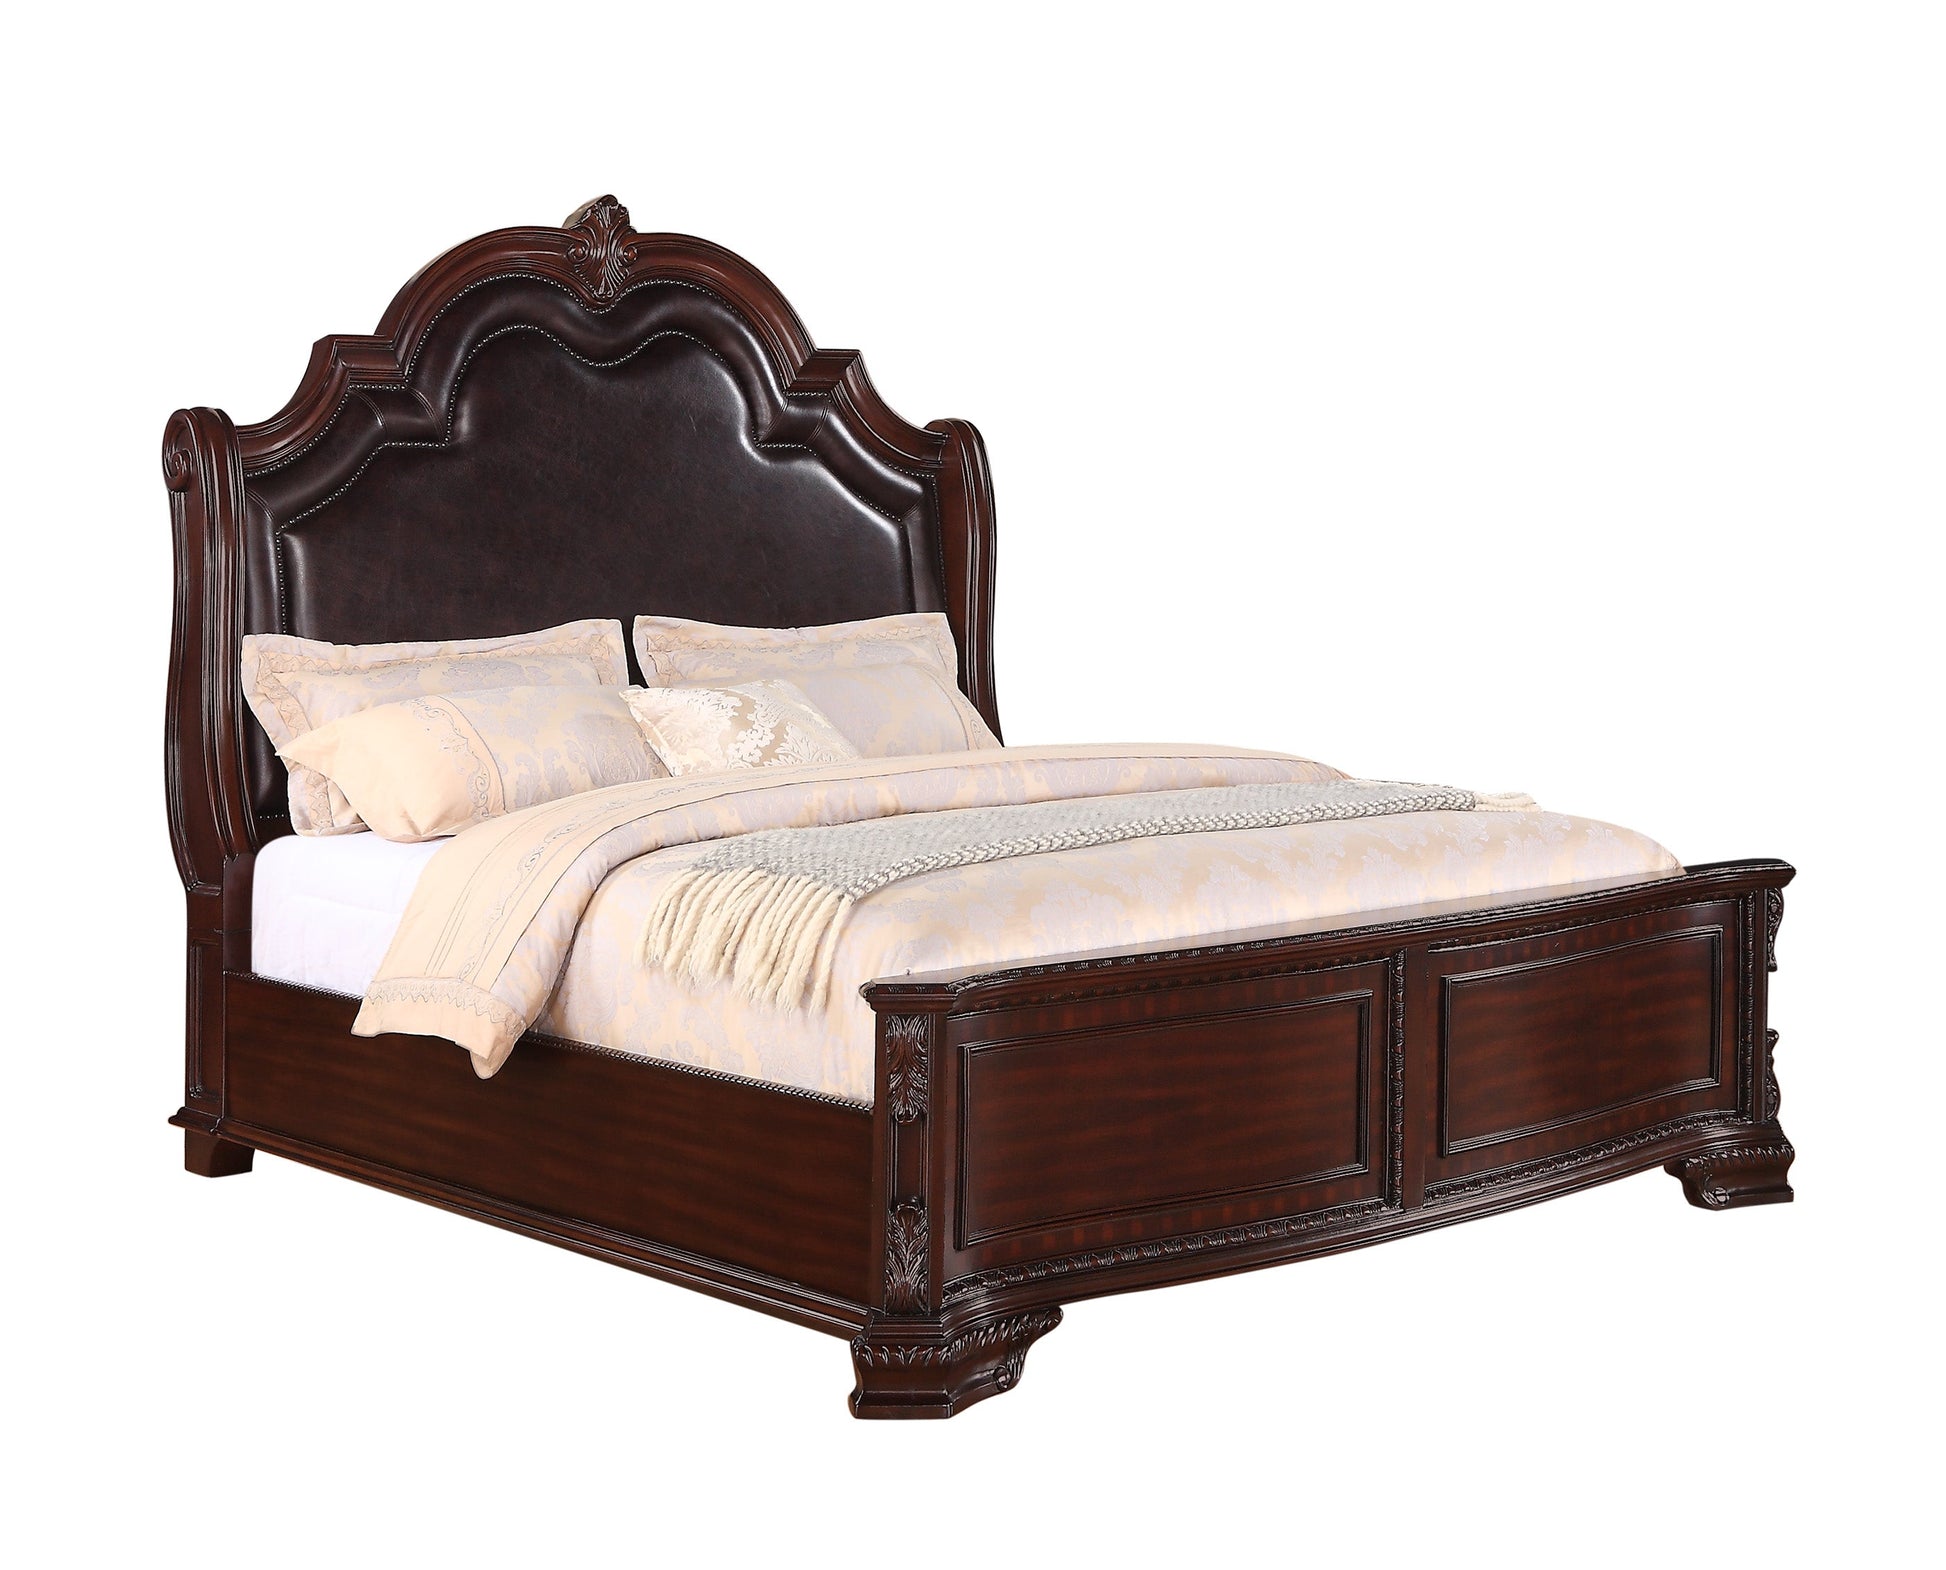 Sheffield Rich Brown And Dark Cherry Finish Rustic Faux Leather Upholstered Panel Bedroom Set, Wood